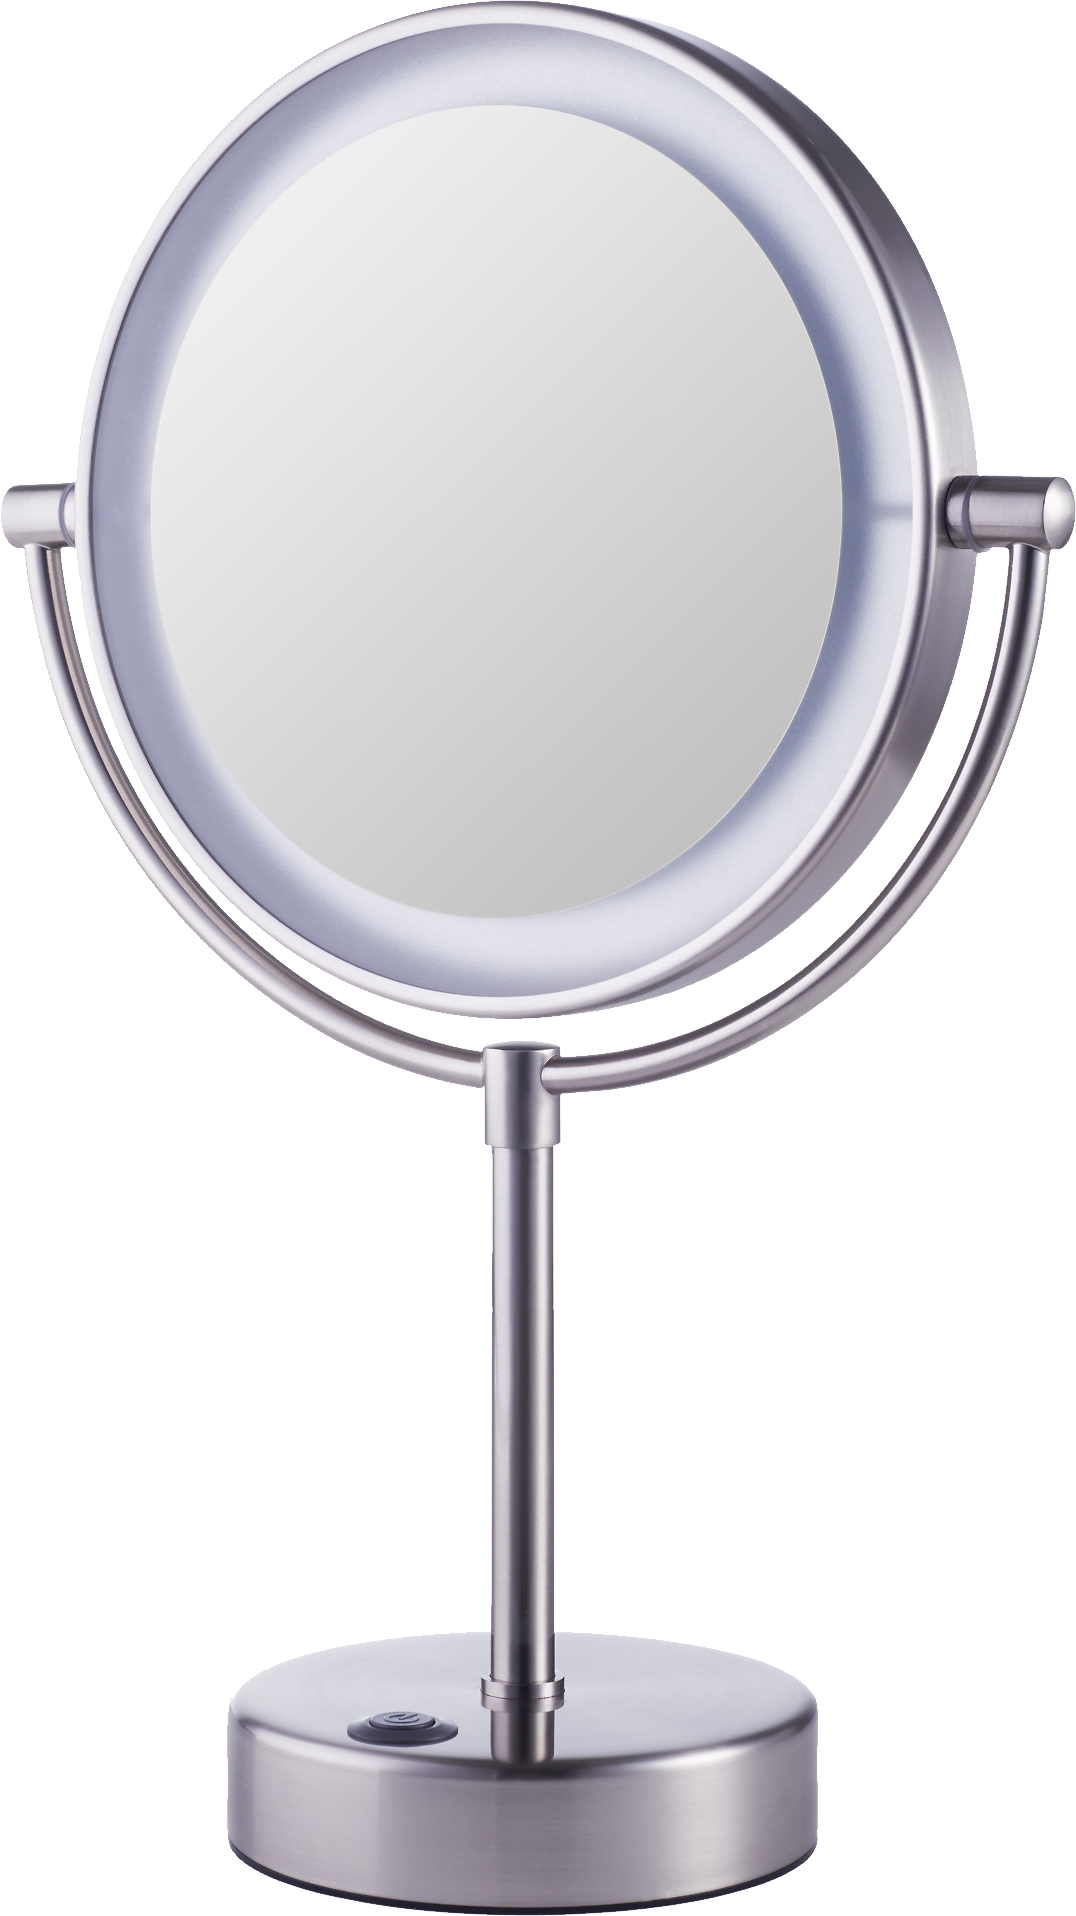 Mirror clipart toilet. Sink with stickers png